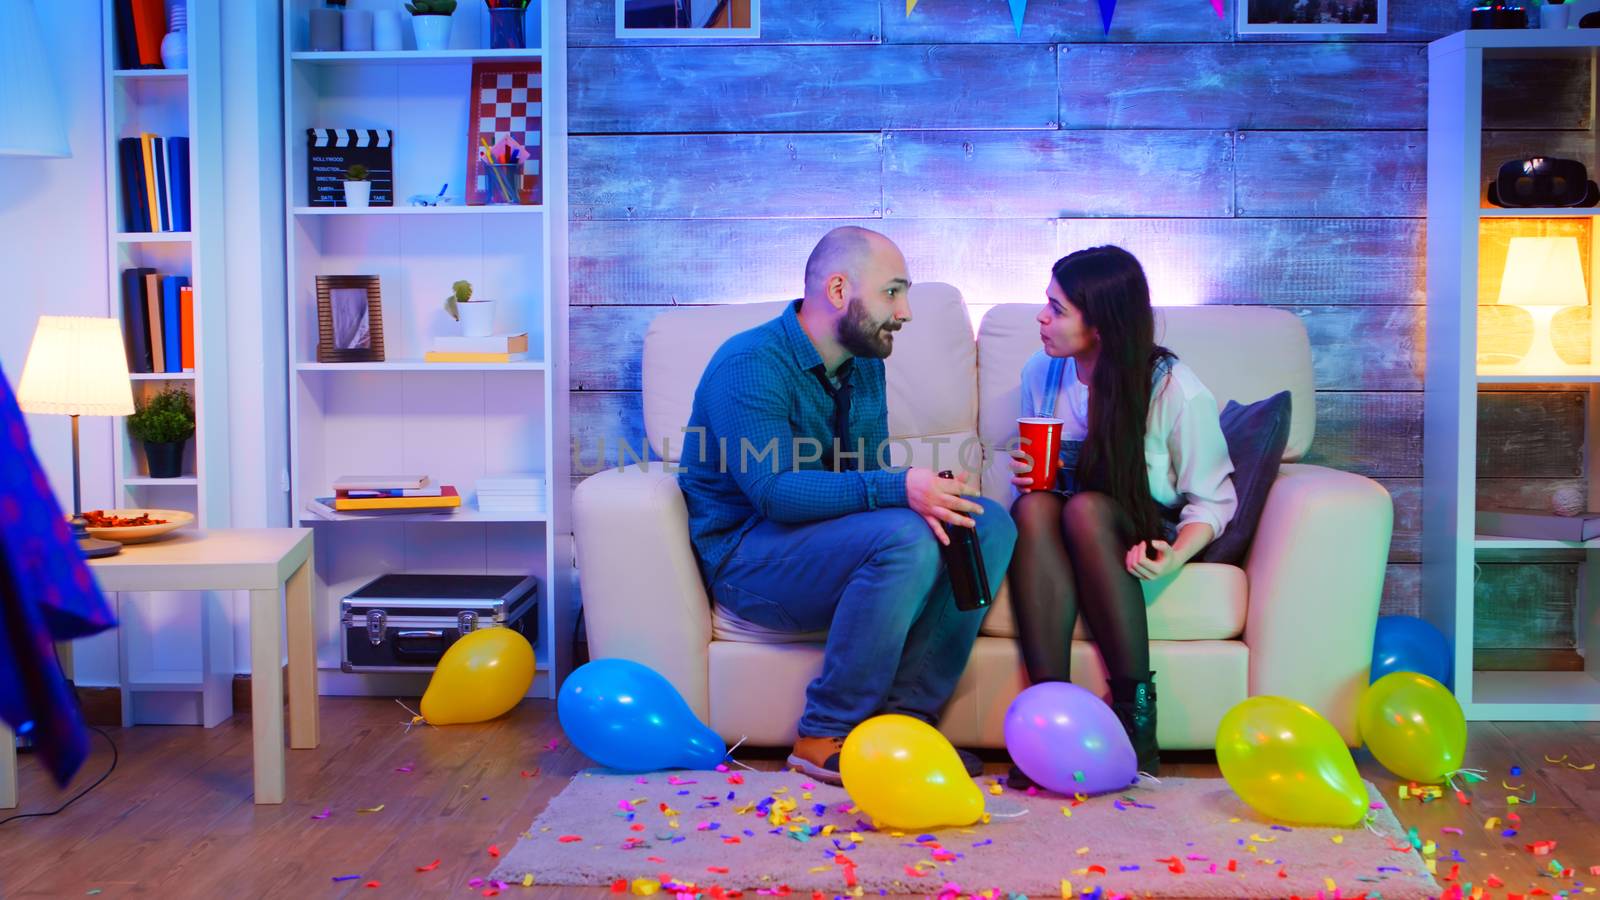 Group of people dancing at a party with neon lights in apartment while young couple is having an argument.